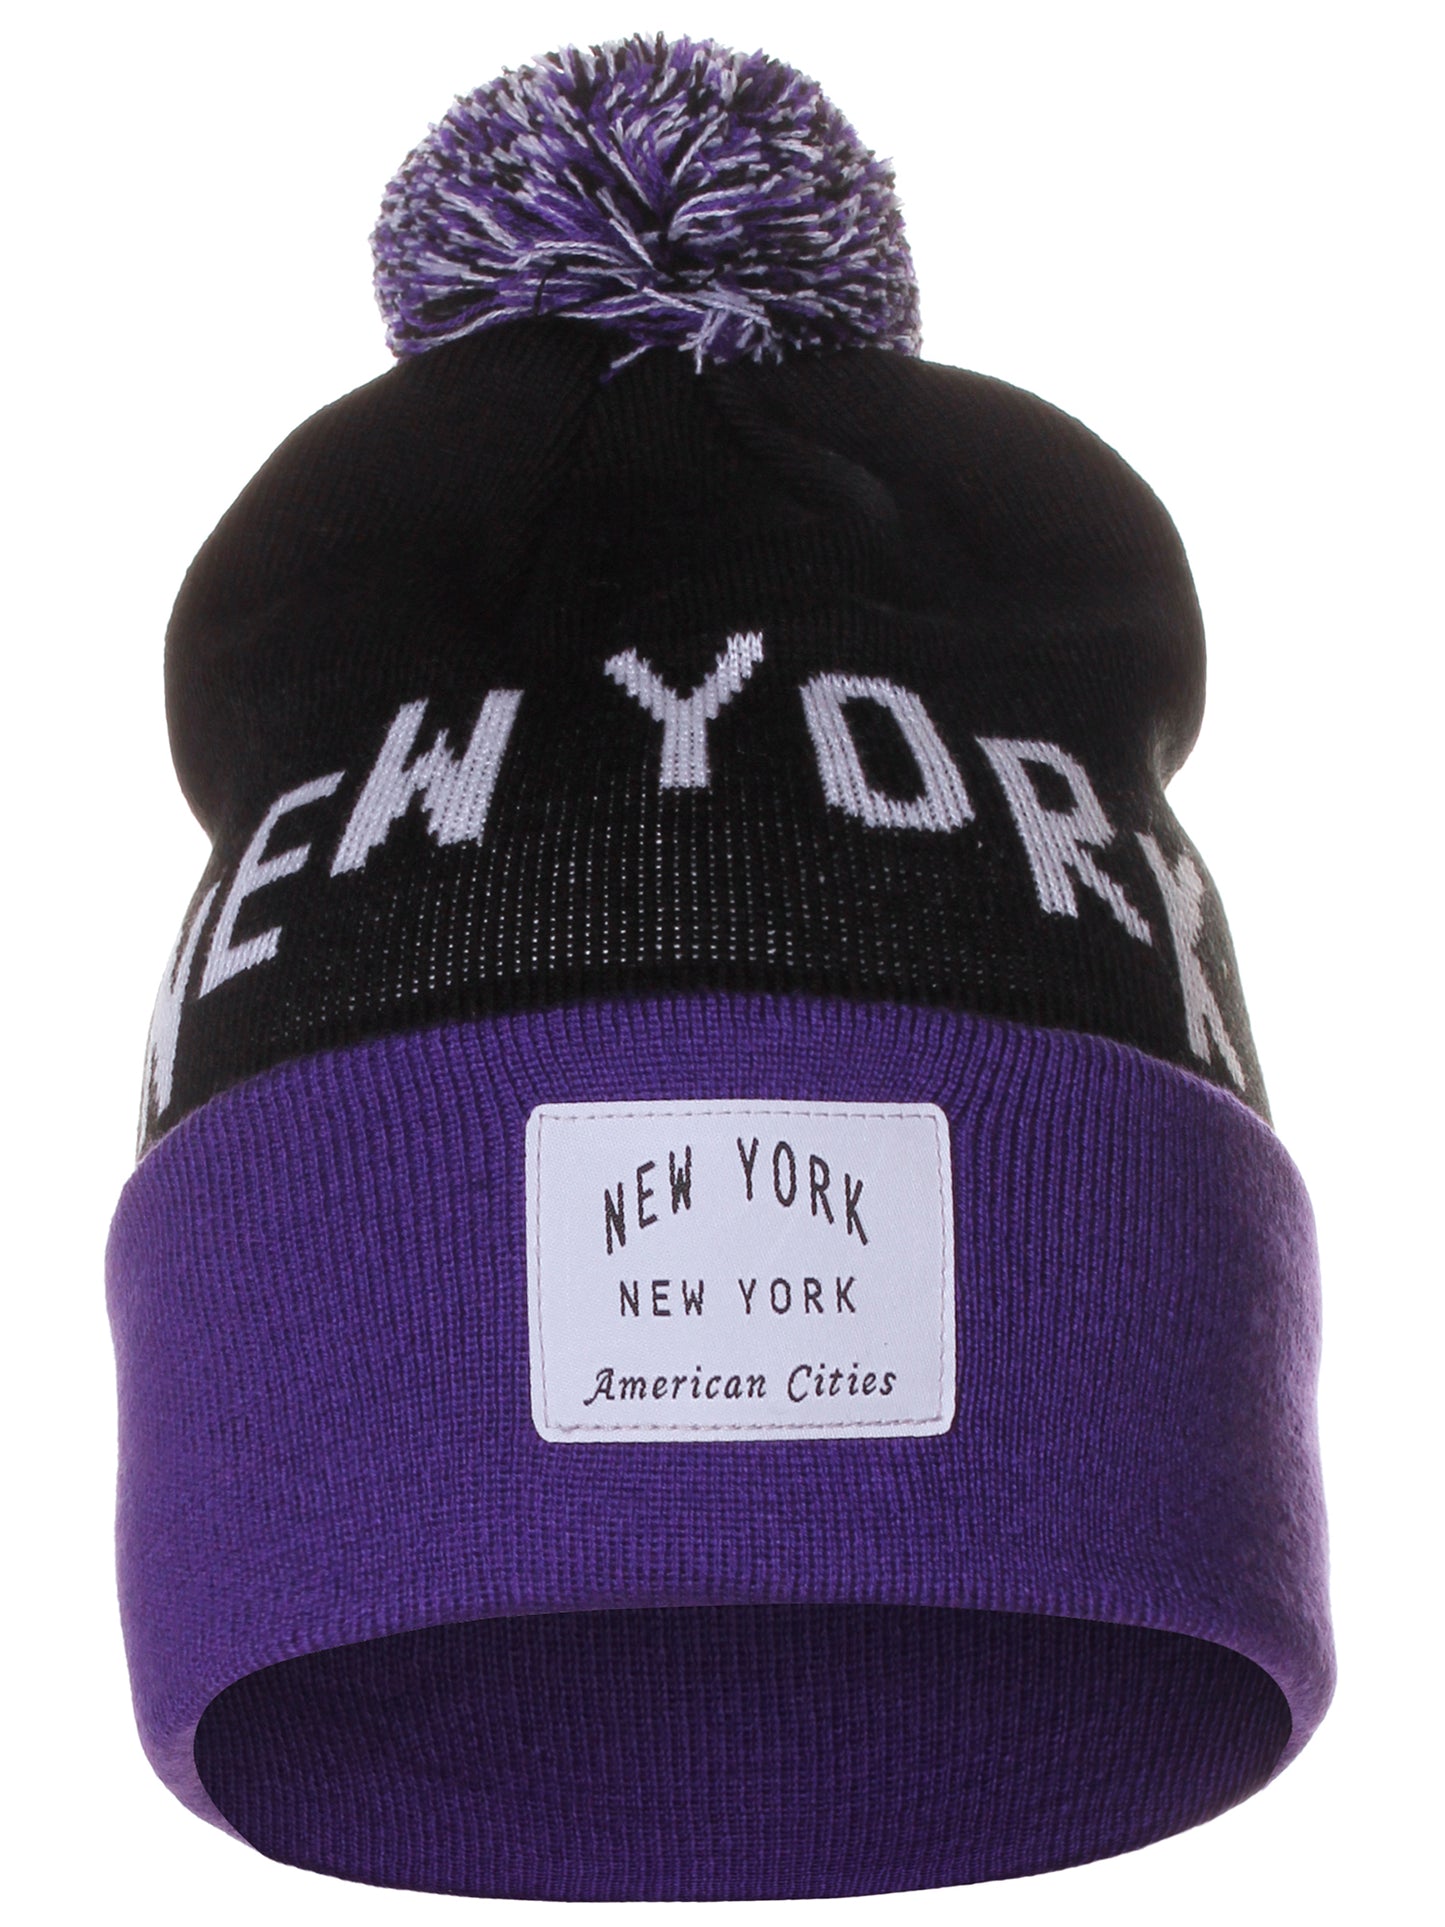 American Cities New York NY Arch Letters Pom Pom Knit Hat Cap Beanie